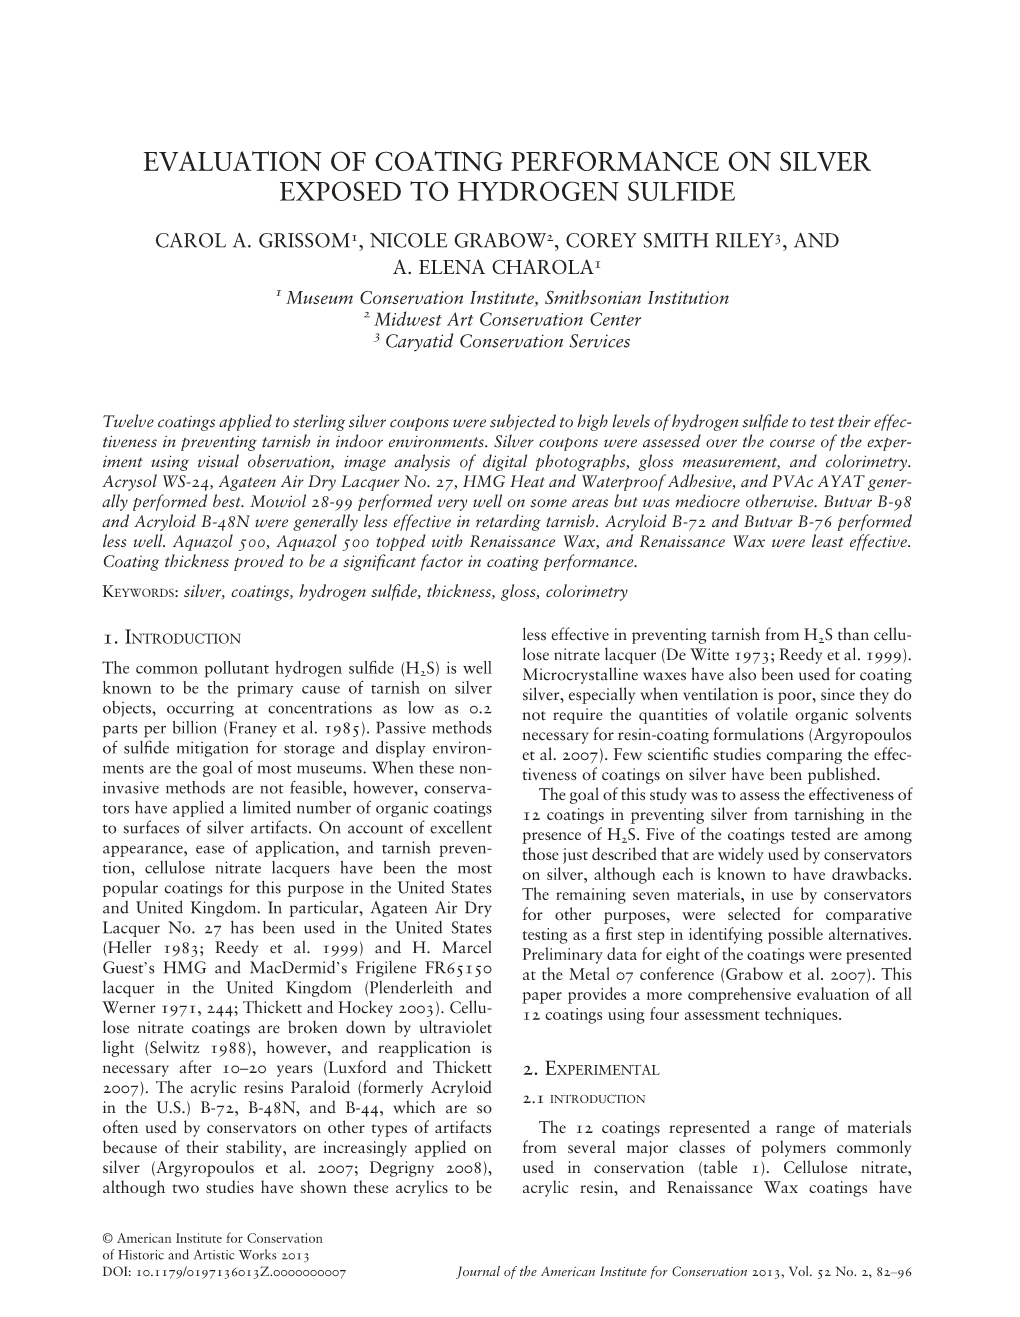 Evaluation of Coating Performance on Silver Exposed to Hydrogen Sulfide